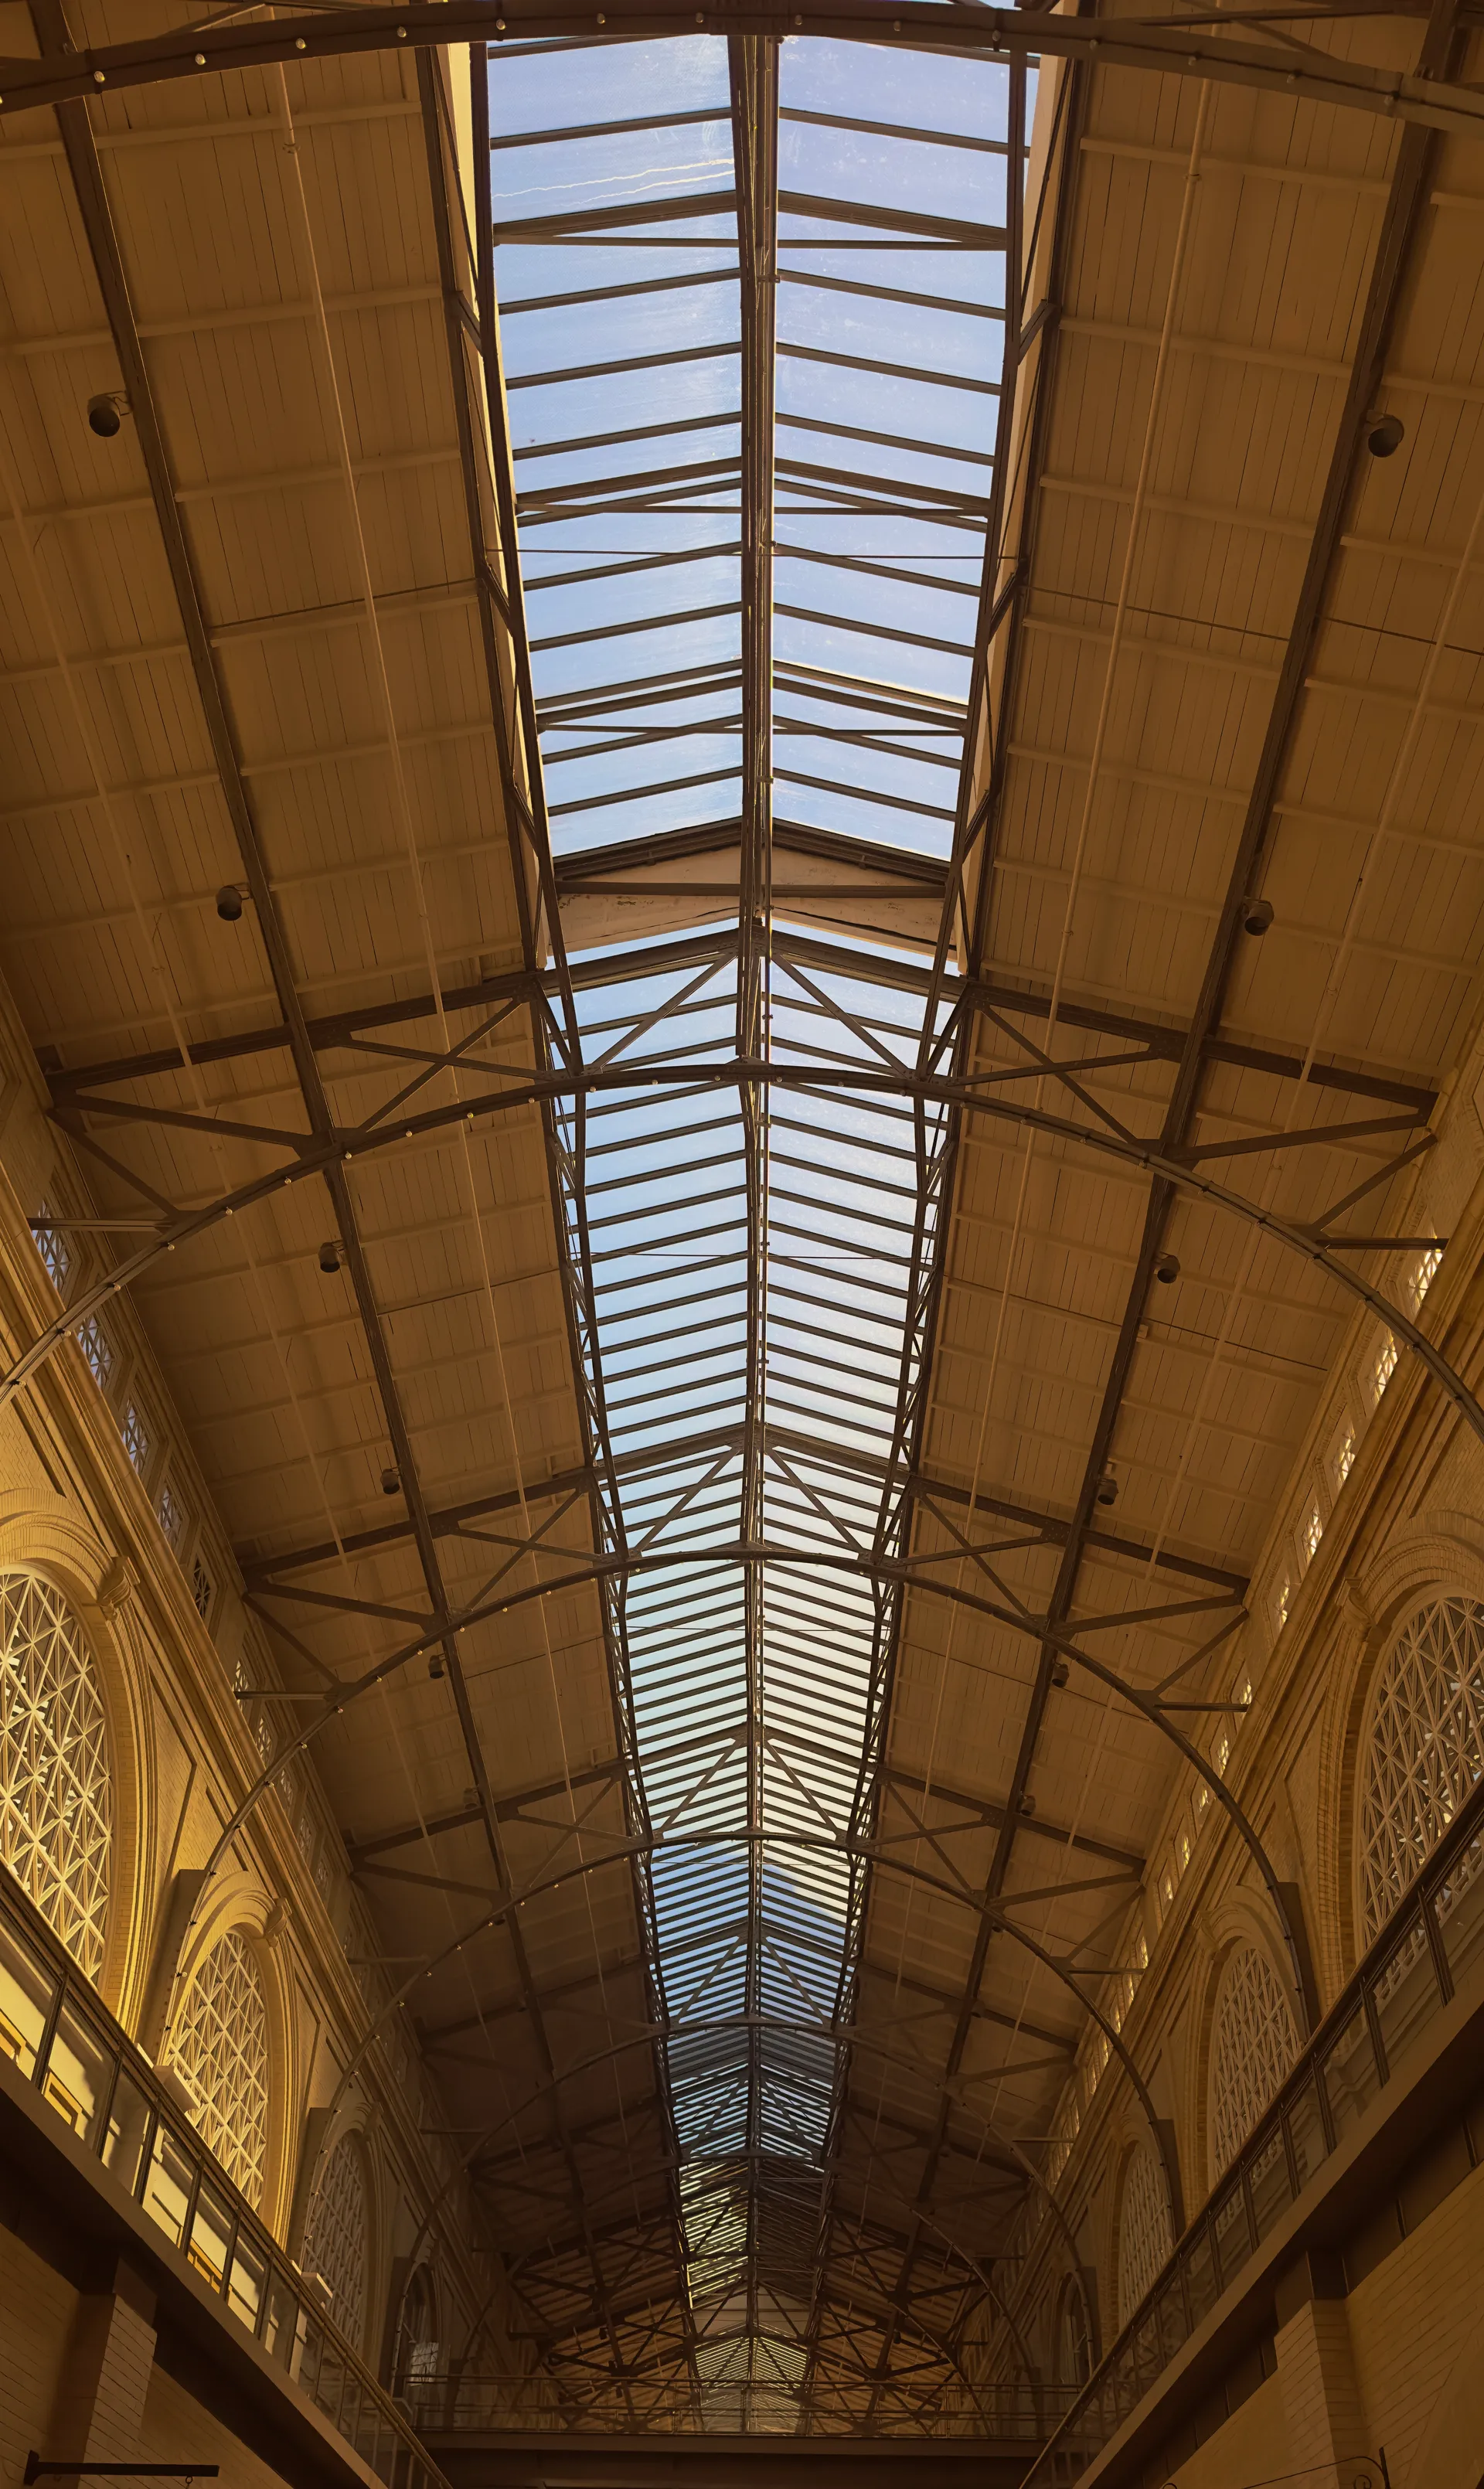 A view of the roof of the Ferry Building along the Embarcadero in San Francisco